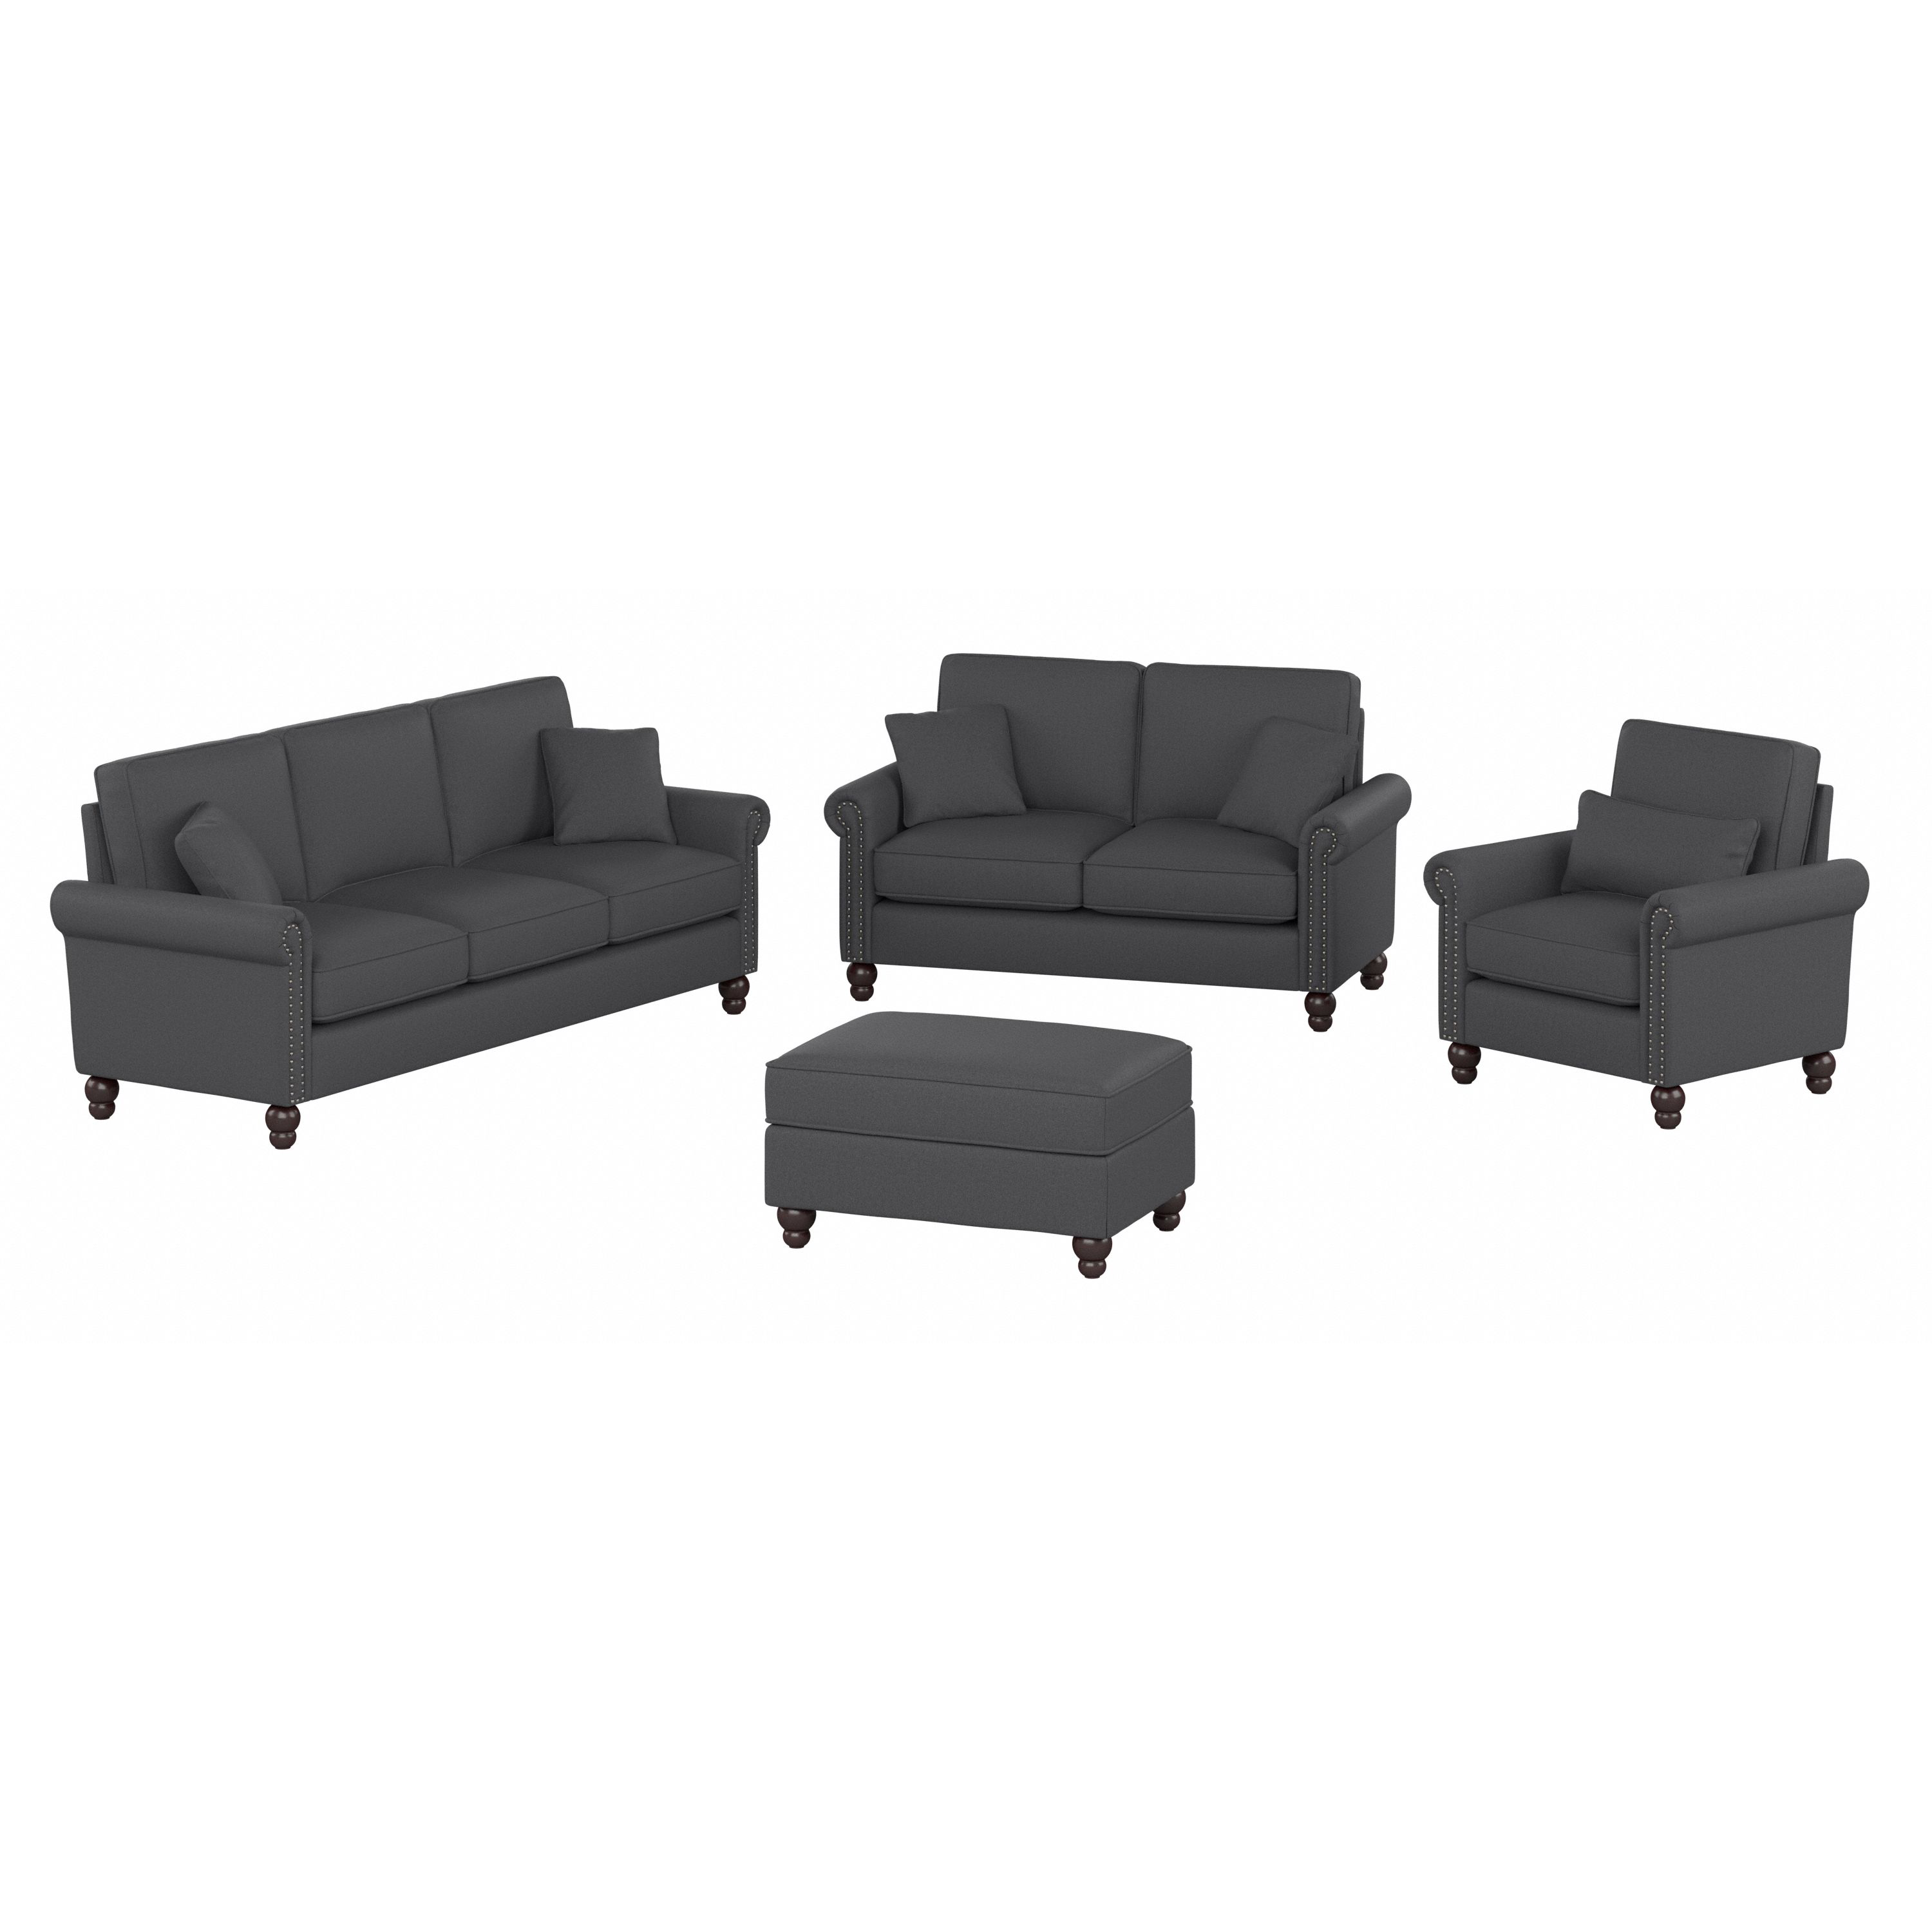 Shop Bush Furniture Coventry 85W Sofa with Loveseat, Accent Chair, and Ottoman 02 CVN020CGH #color_charcoal gray herringbone fabr